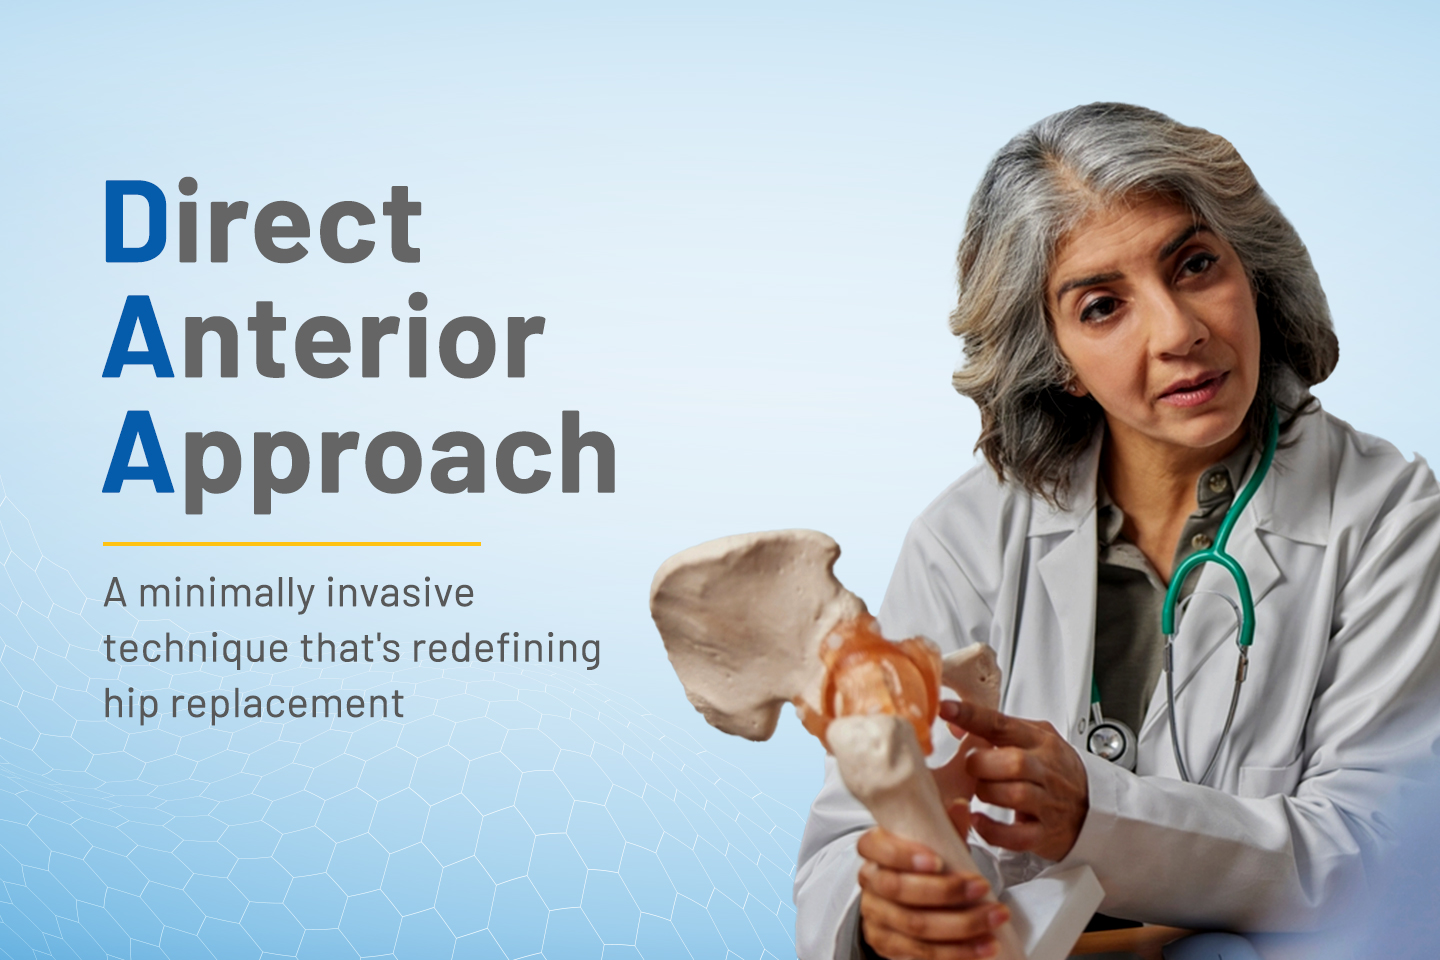 Advancements in Total Hip Replacement: The Direct Anterior Approach